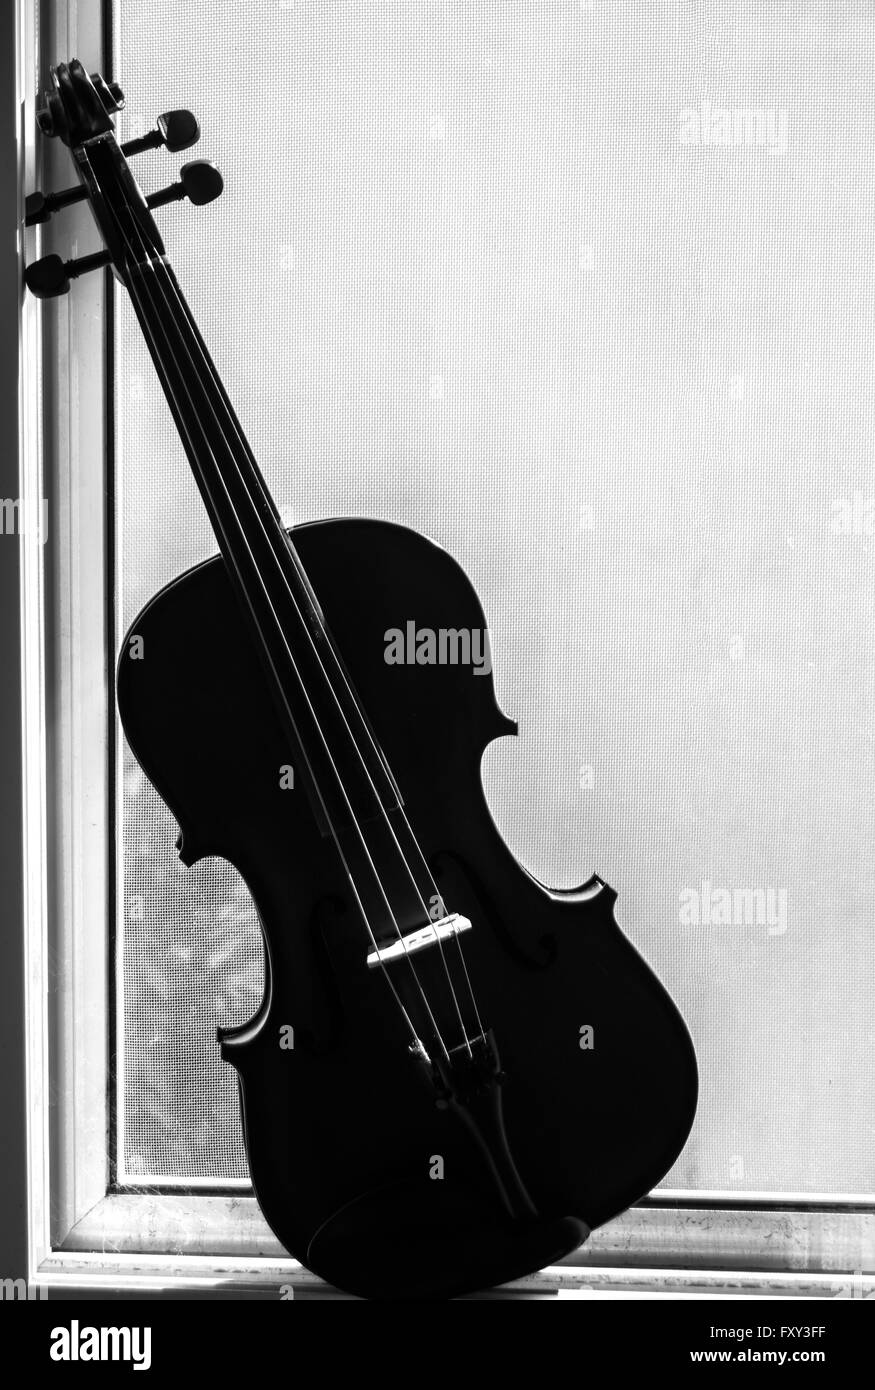 A viola in high contrast against a window Stock Photo